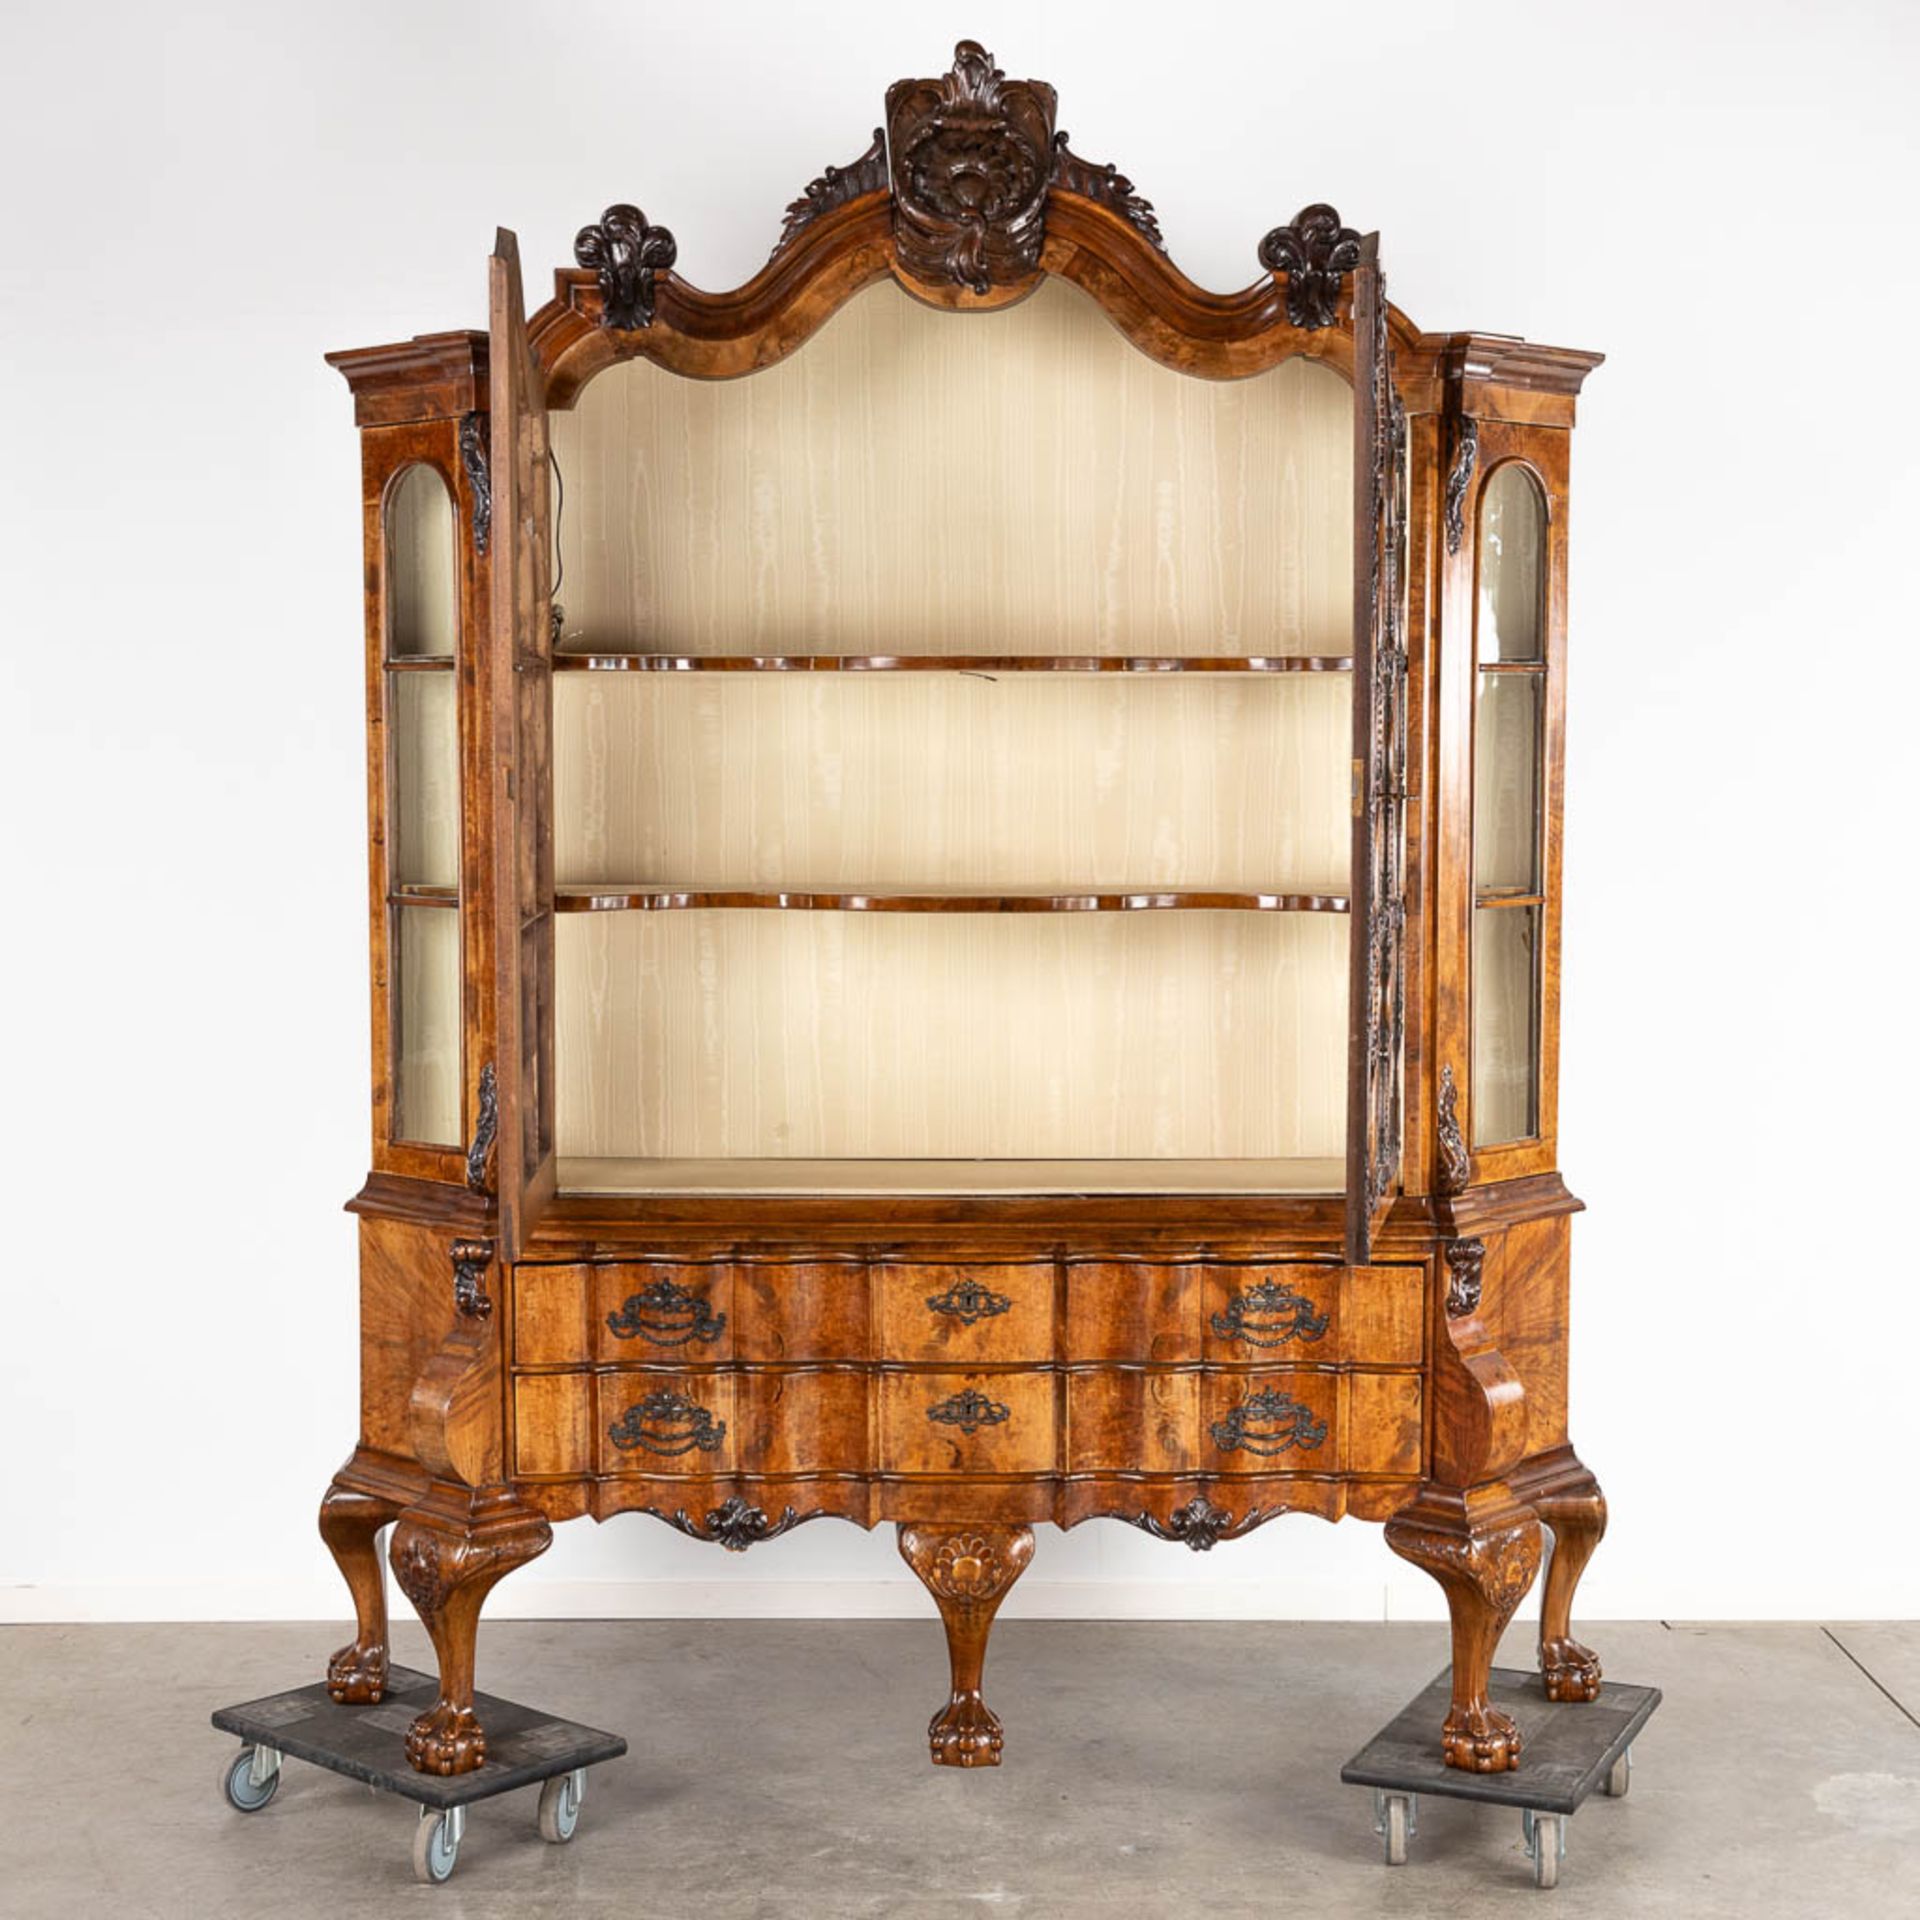 A large display cabinet, England, Chippendale style. 19th C. (D:53 x W:208 x H:252 cm) - Image 3 of 20